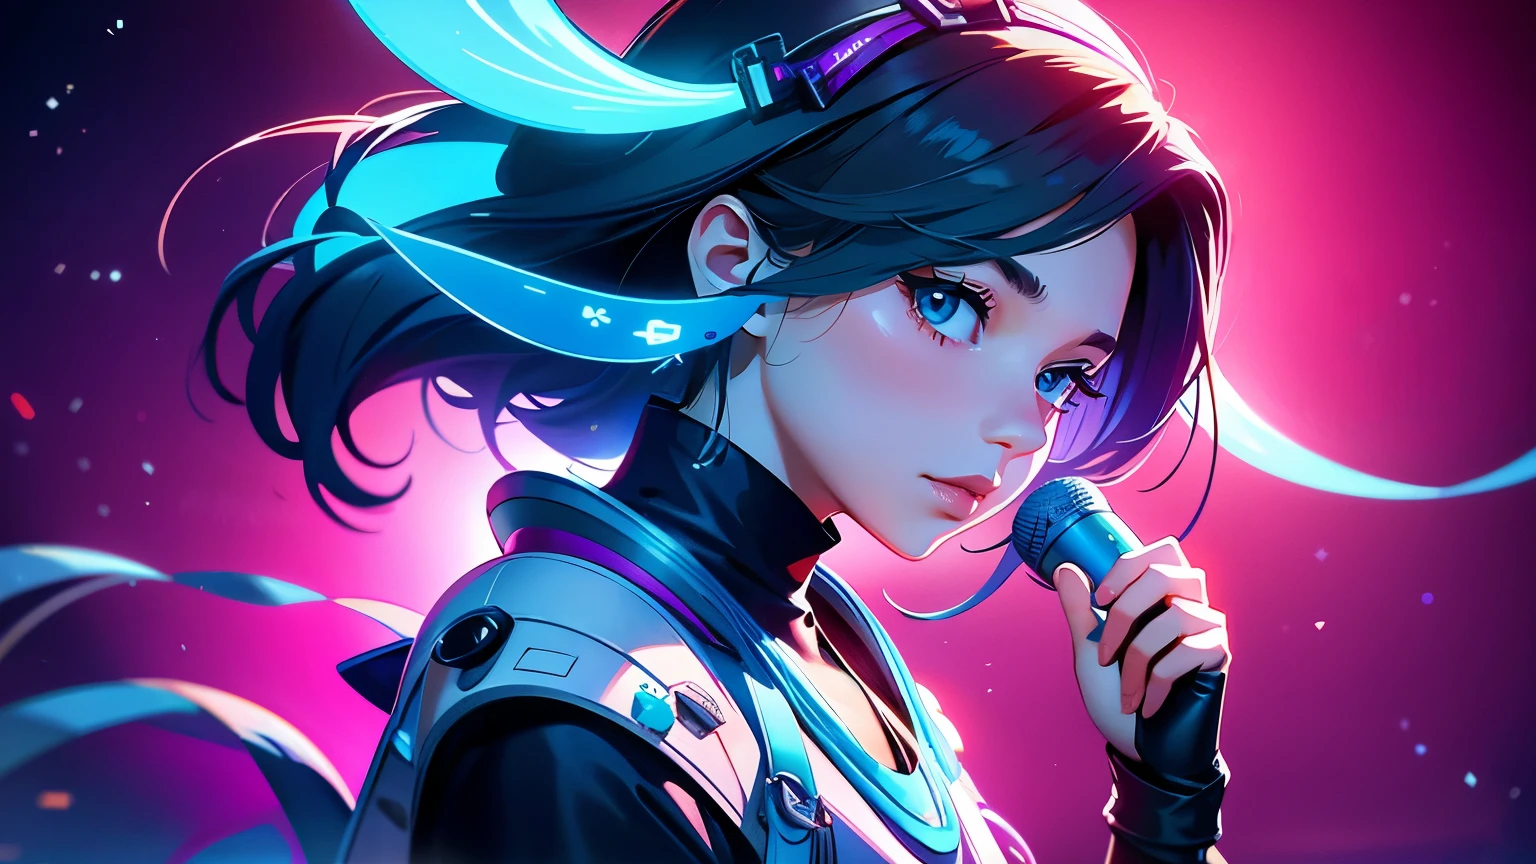 spray art、product、Super realistic、8ｋ、background、people passing by in a hurry、modern、science、Complex３D headset very delicate and beautiful、very detailed、 ,unity ,wallpaper,growing up, attention to detail, masterpiece,highest quality,official art,Hvery detailed ticker unity 8K wallpapers、time、time軸、clock、philosophy、physics、science